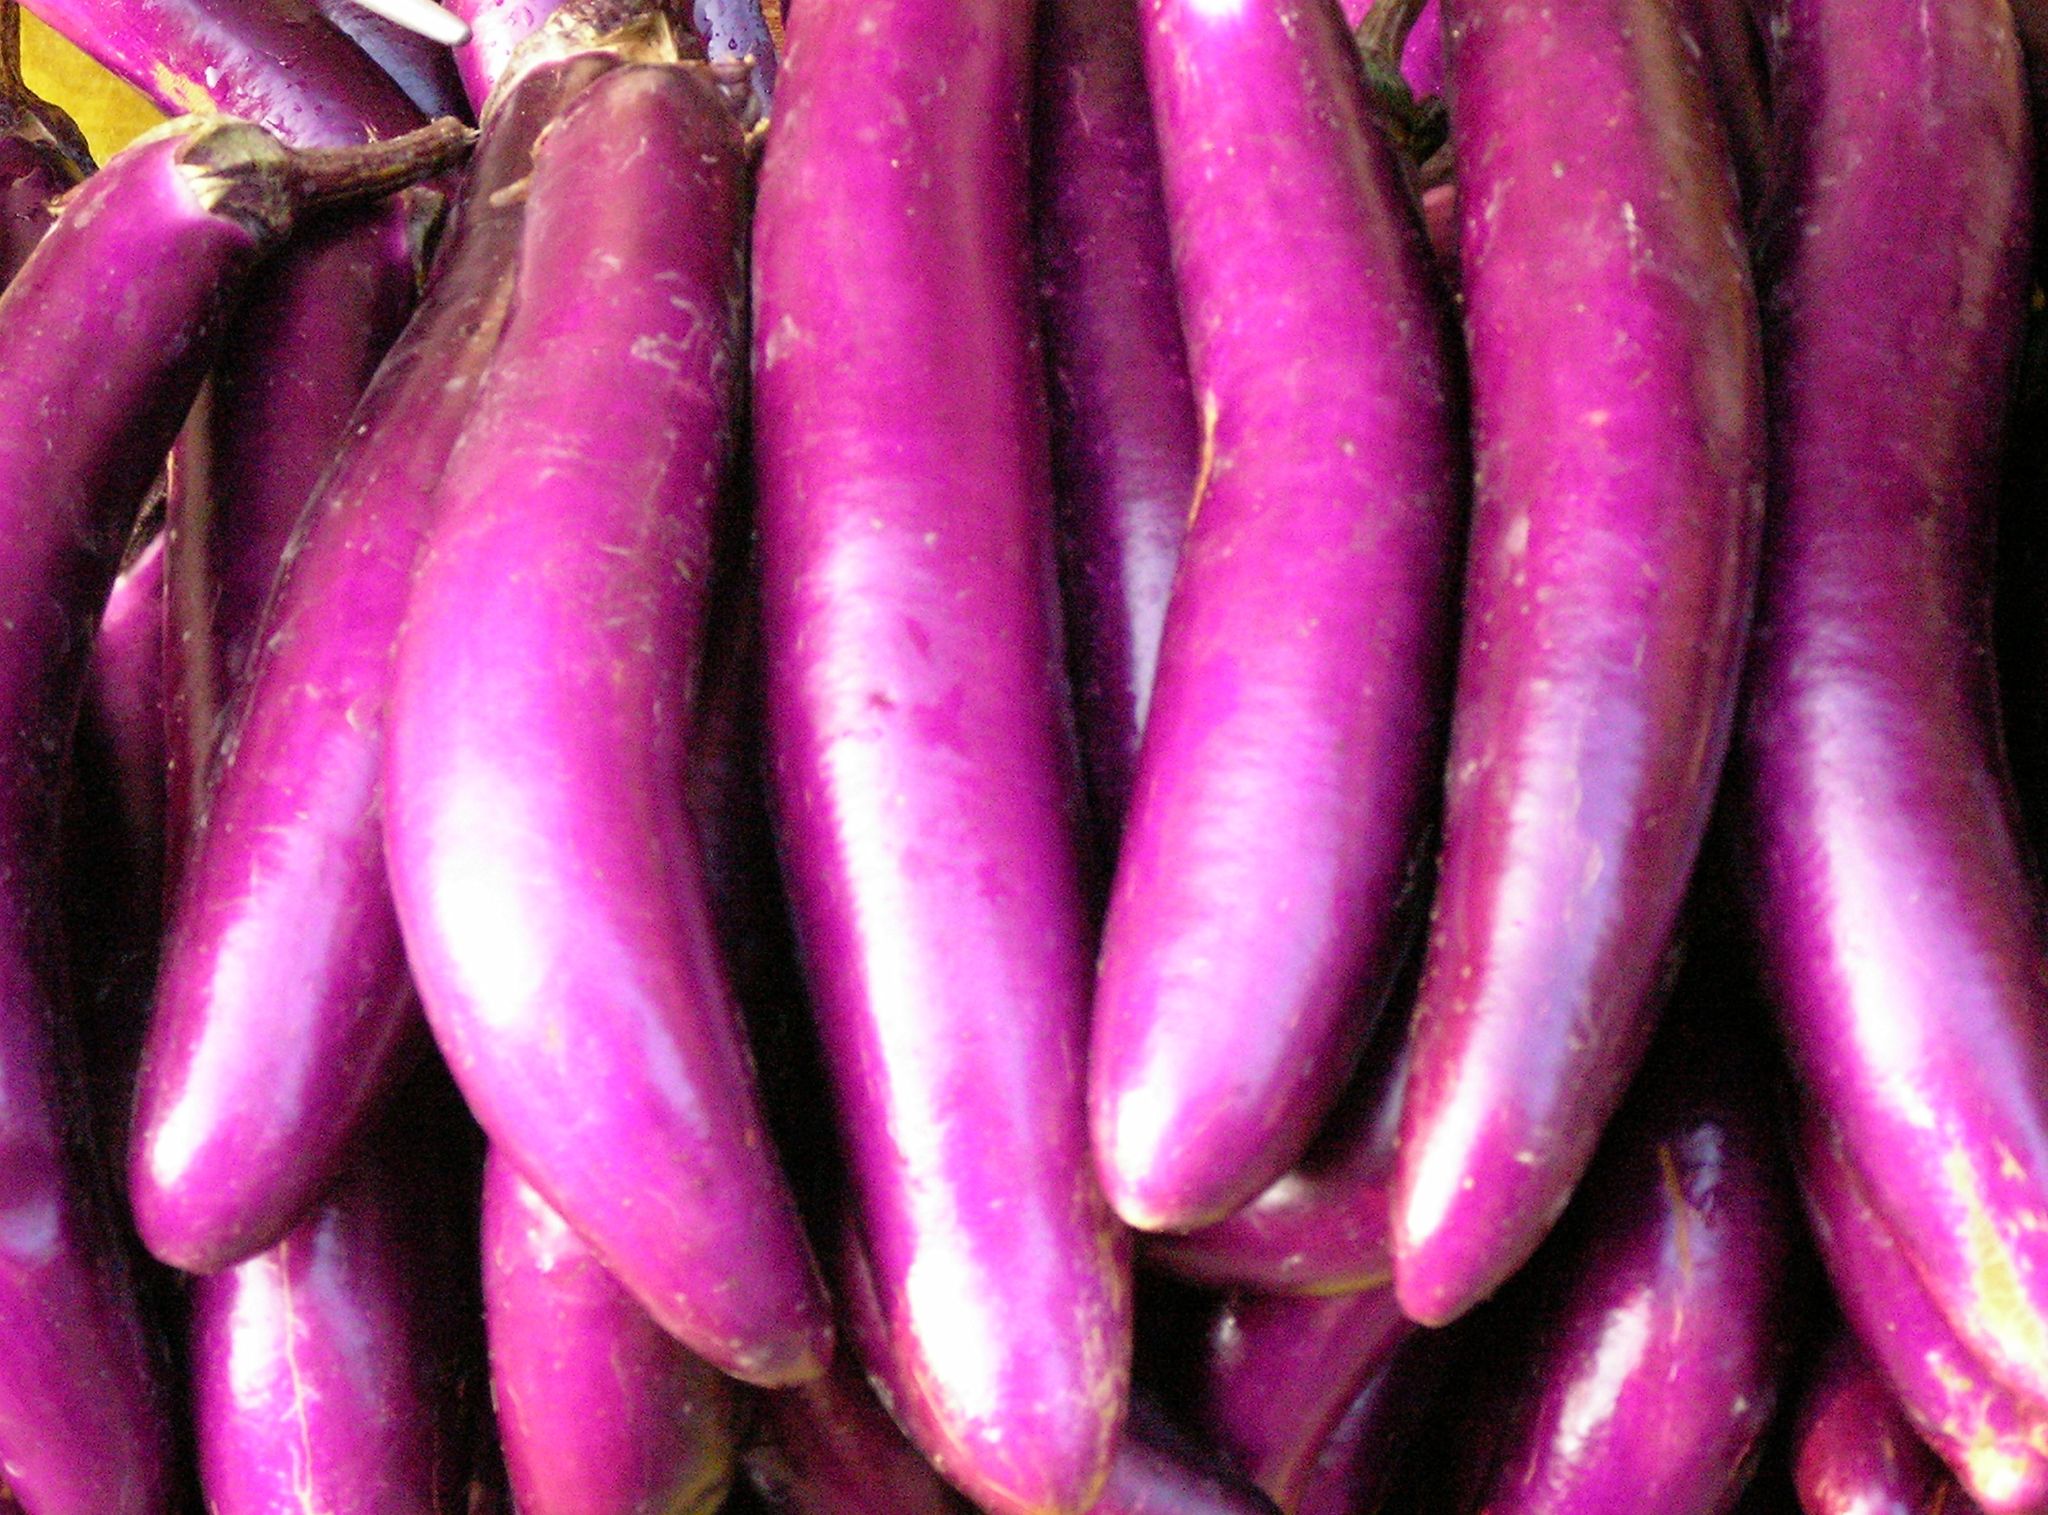 a close up of purple bananas that are still ripe